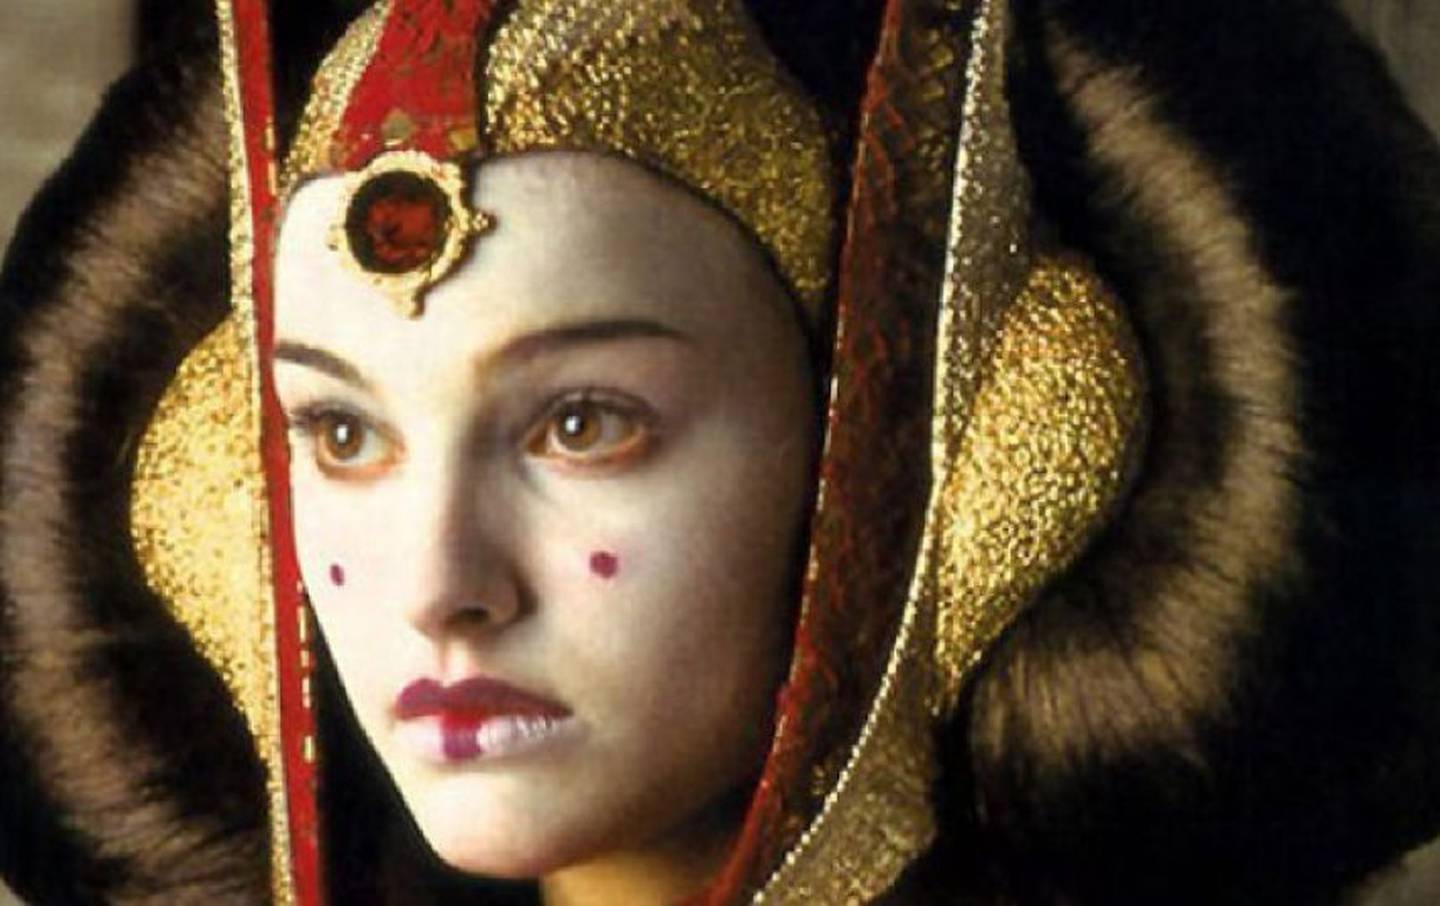 How could Natalie Portman return as Padme Amidala to the Star Wars universe?